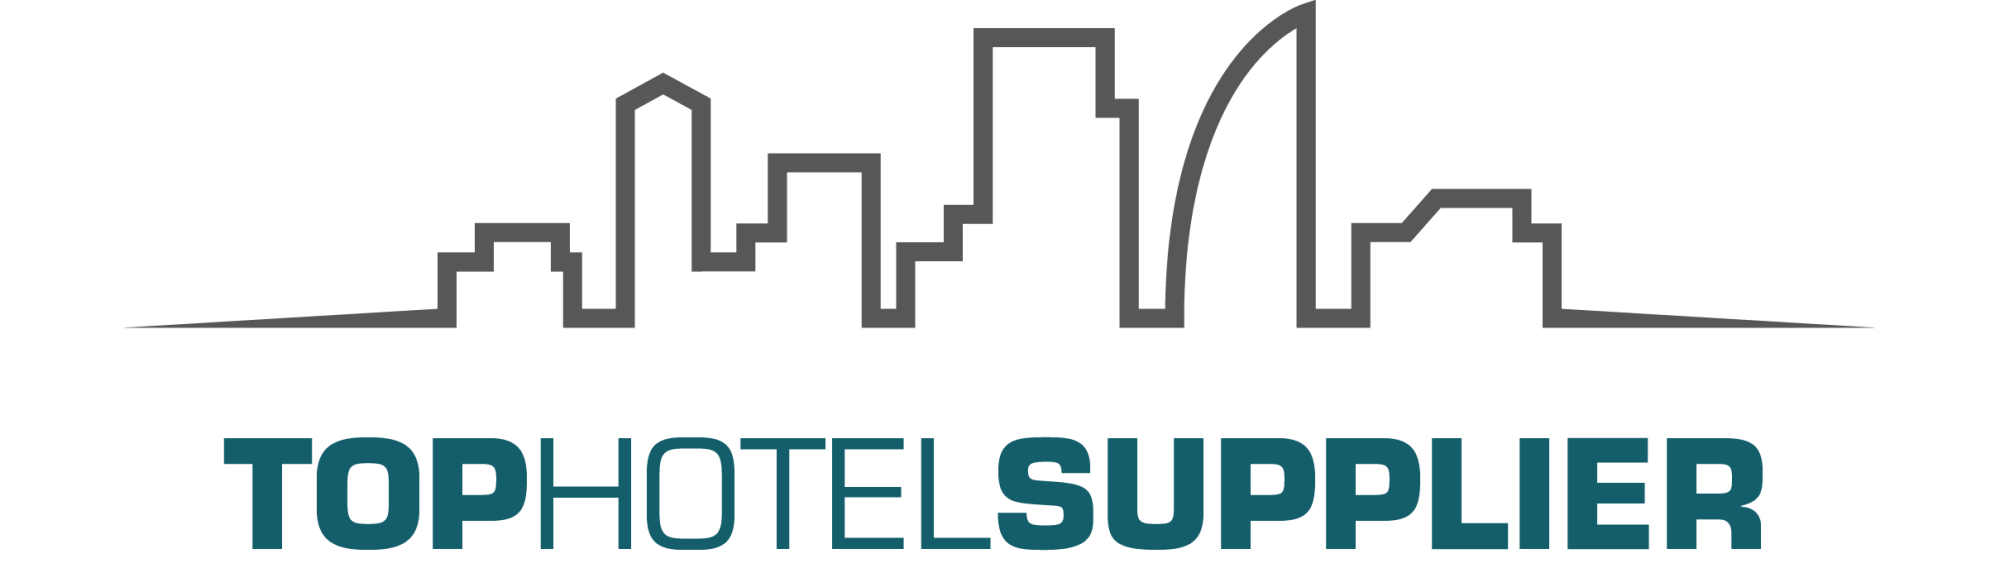 Leading Hotel Logo - Home - TOPHOTELPROJECTS